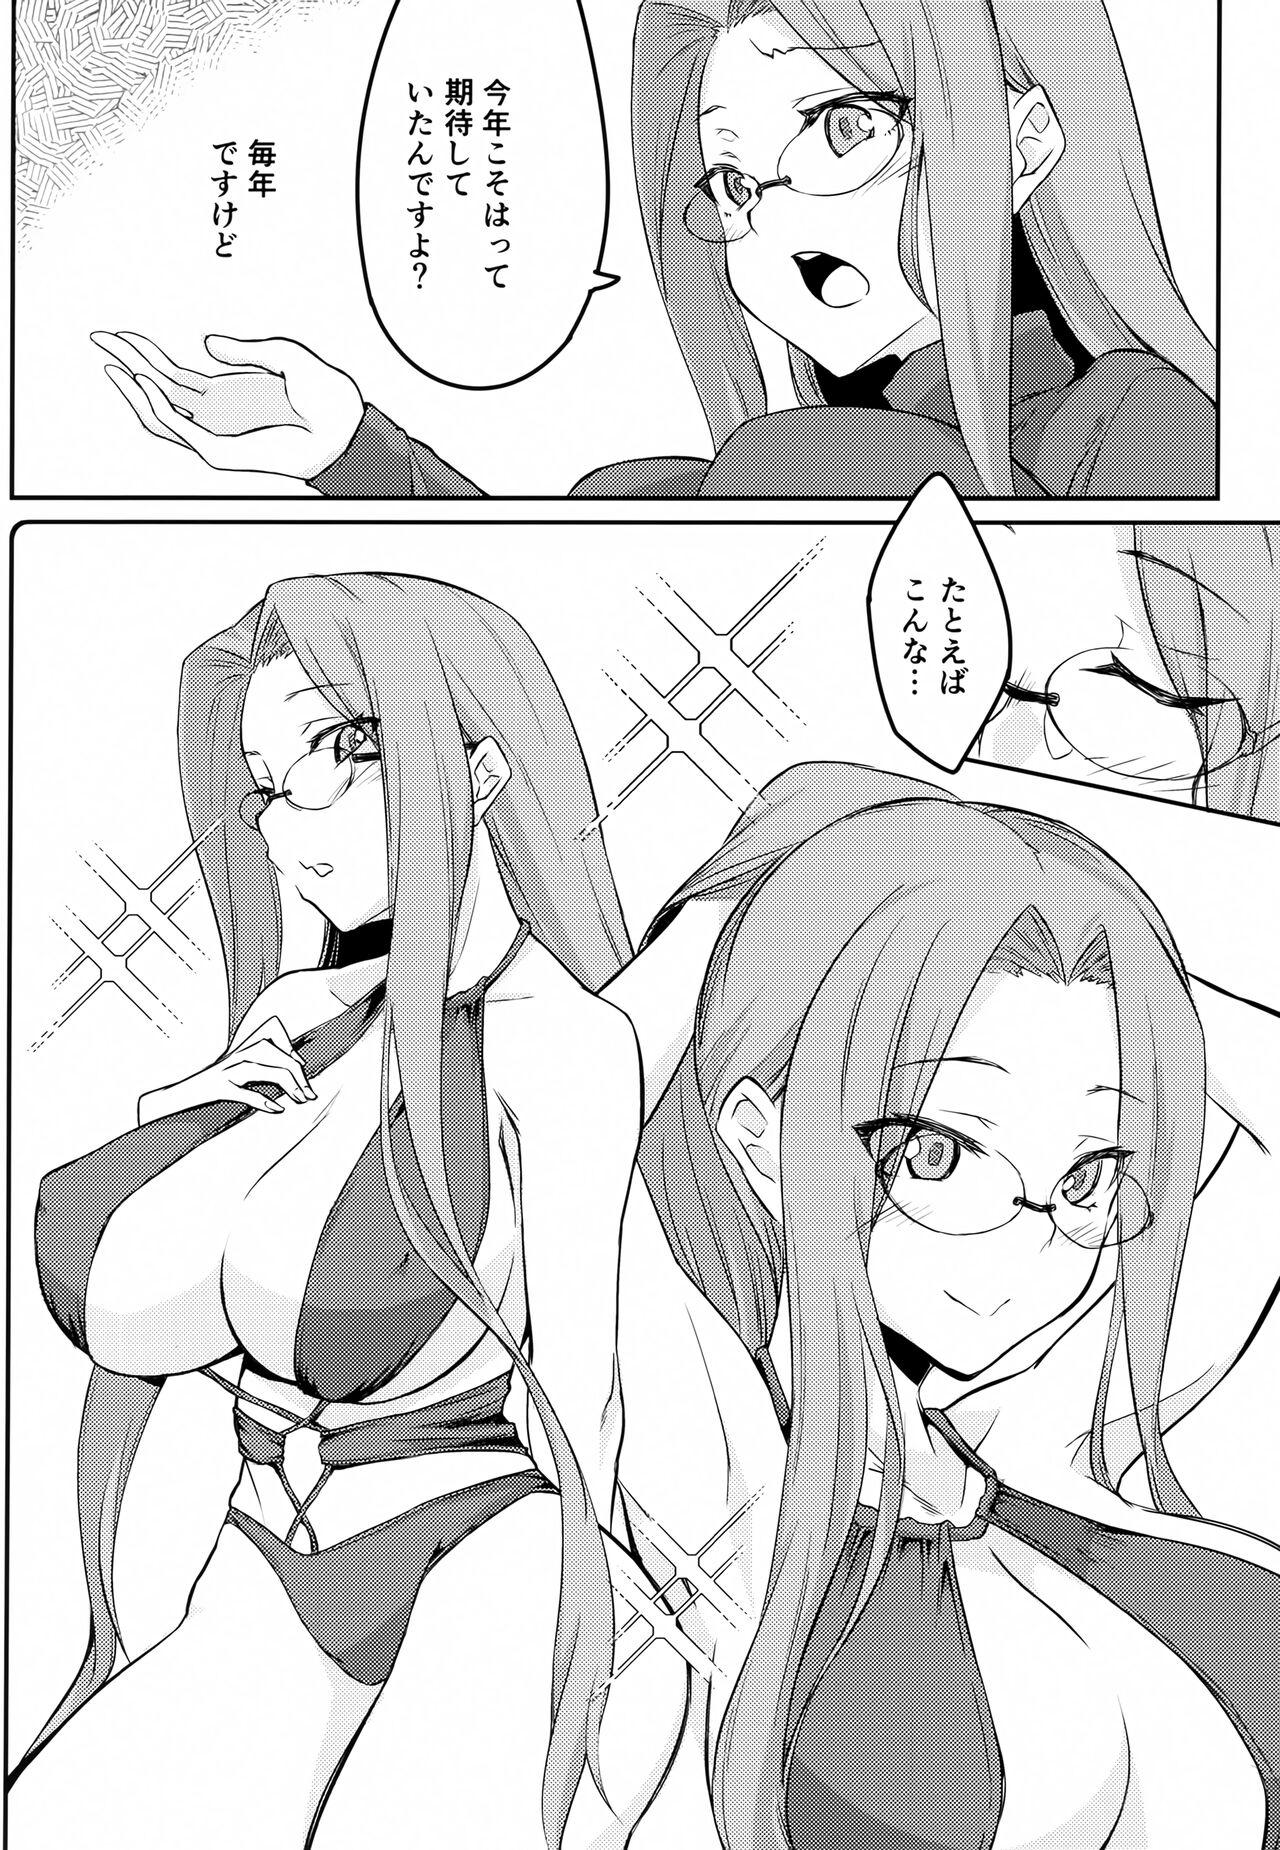 Tied R15 - Fate stay night Transexual - Page 5